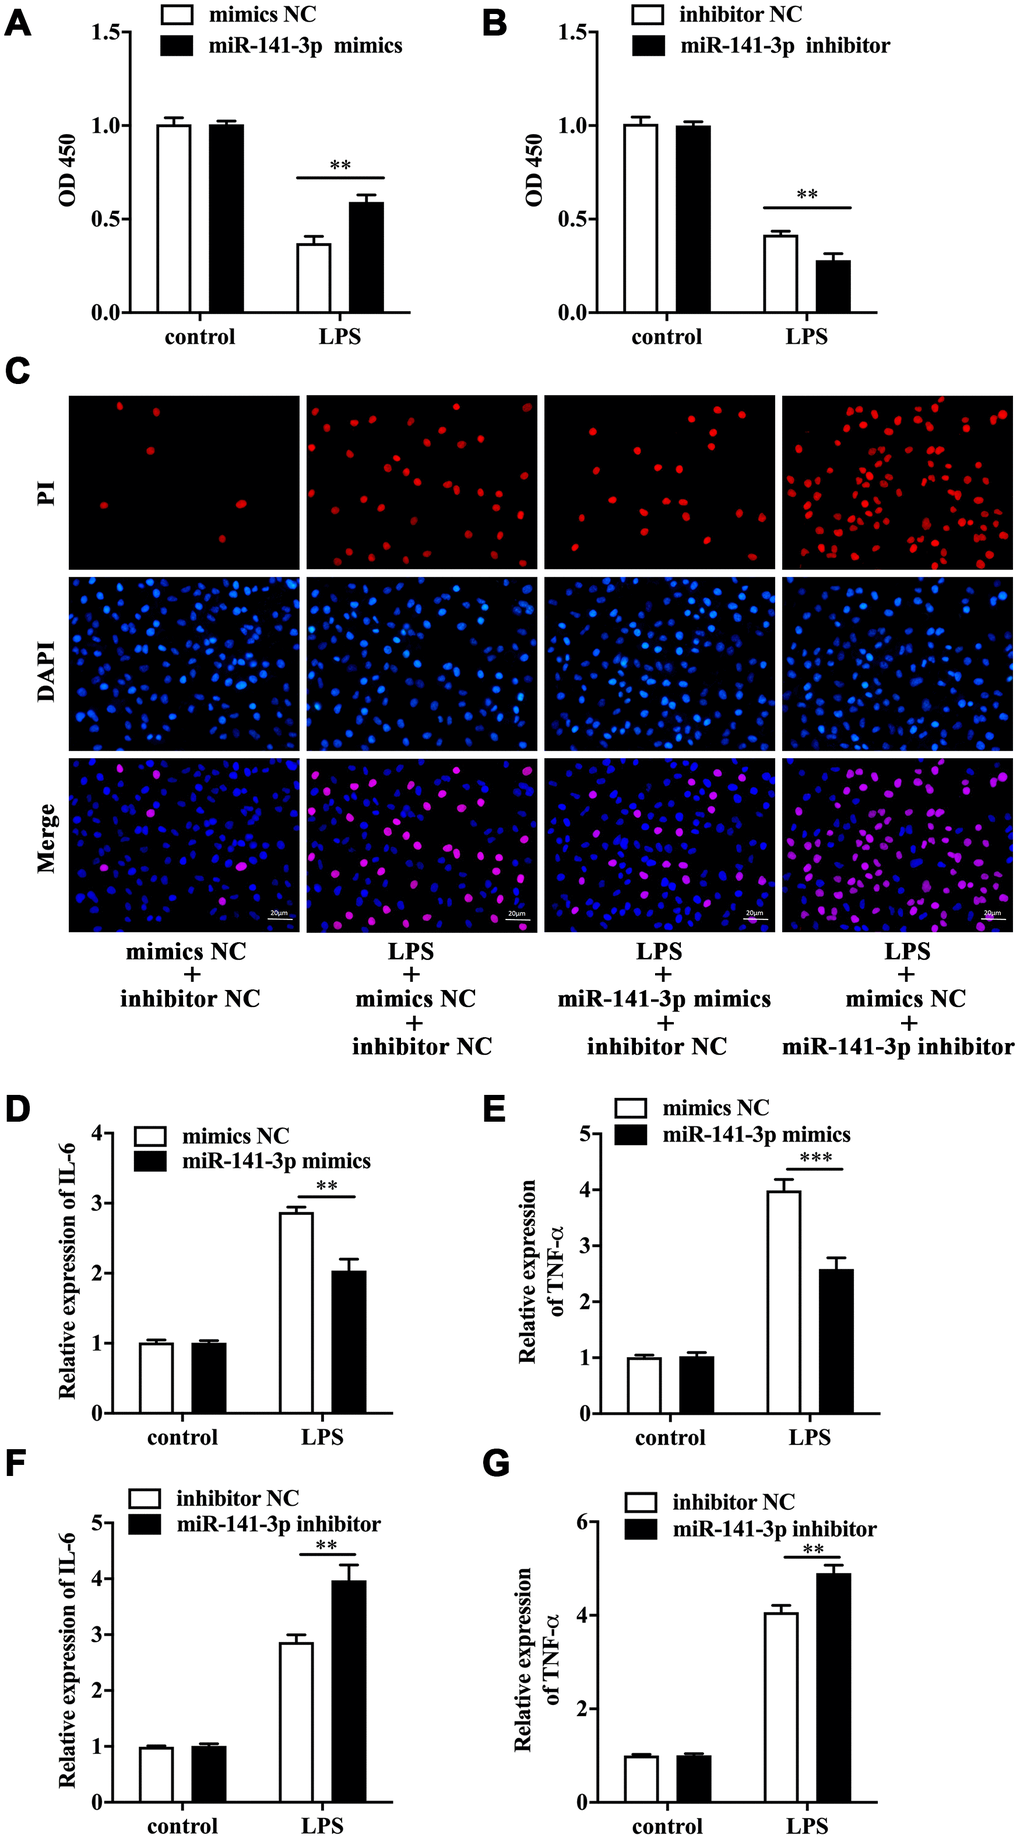 MiR-141-3p downregulation participated in LPS-induced Caco-2 cell injury. Cell viability of LPS-treated Caco-2 cells in the presence of miR-141-3p mimics (A) or miR-141-3p inhibitor (B). (C) PI positive staining of LPS-treated Caco-2 cells with miR-141-3p mimics transfection or miR-141-3p inhibitor transfection. The mRNA level of IL-6 (D) and TNF-α (E) in LPS-treated Caco-2 cells with miR-141-3p mimics transfection. The expression of IL-6 (F) and TNF-α (G) in LPS-treated Caco-2 cells with miR-141-3p inhibitor transfection. Scale bar = 20 μm. **p***p